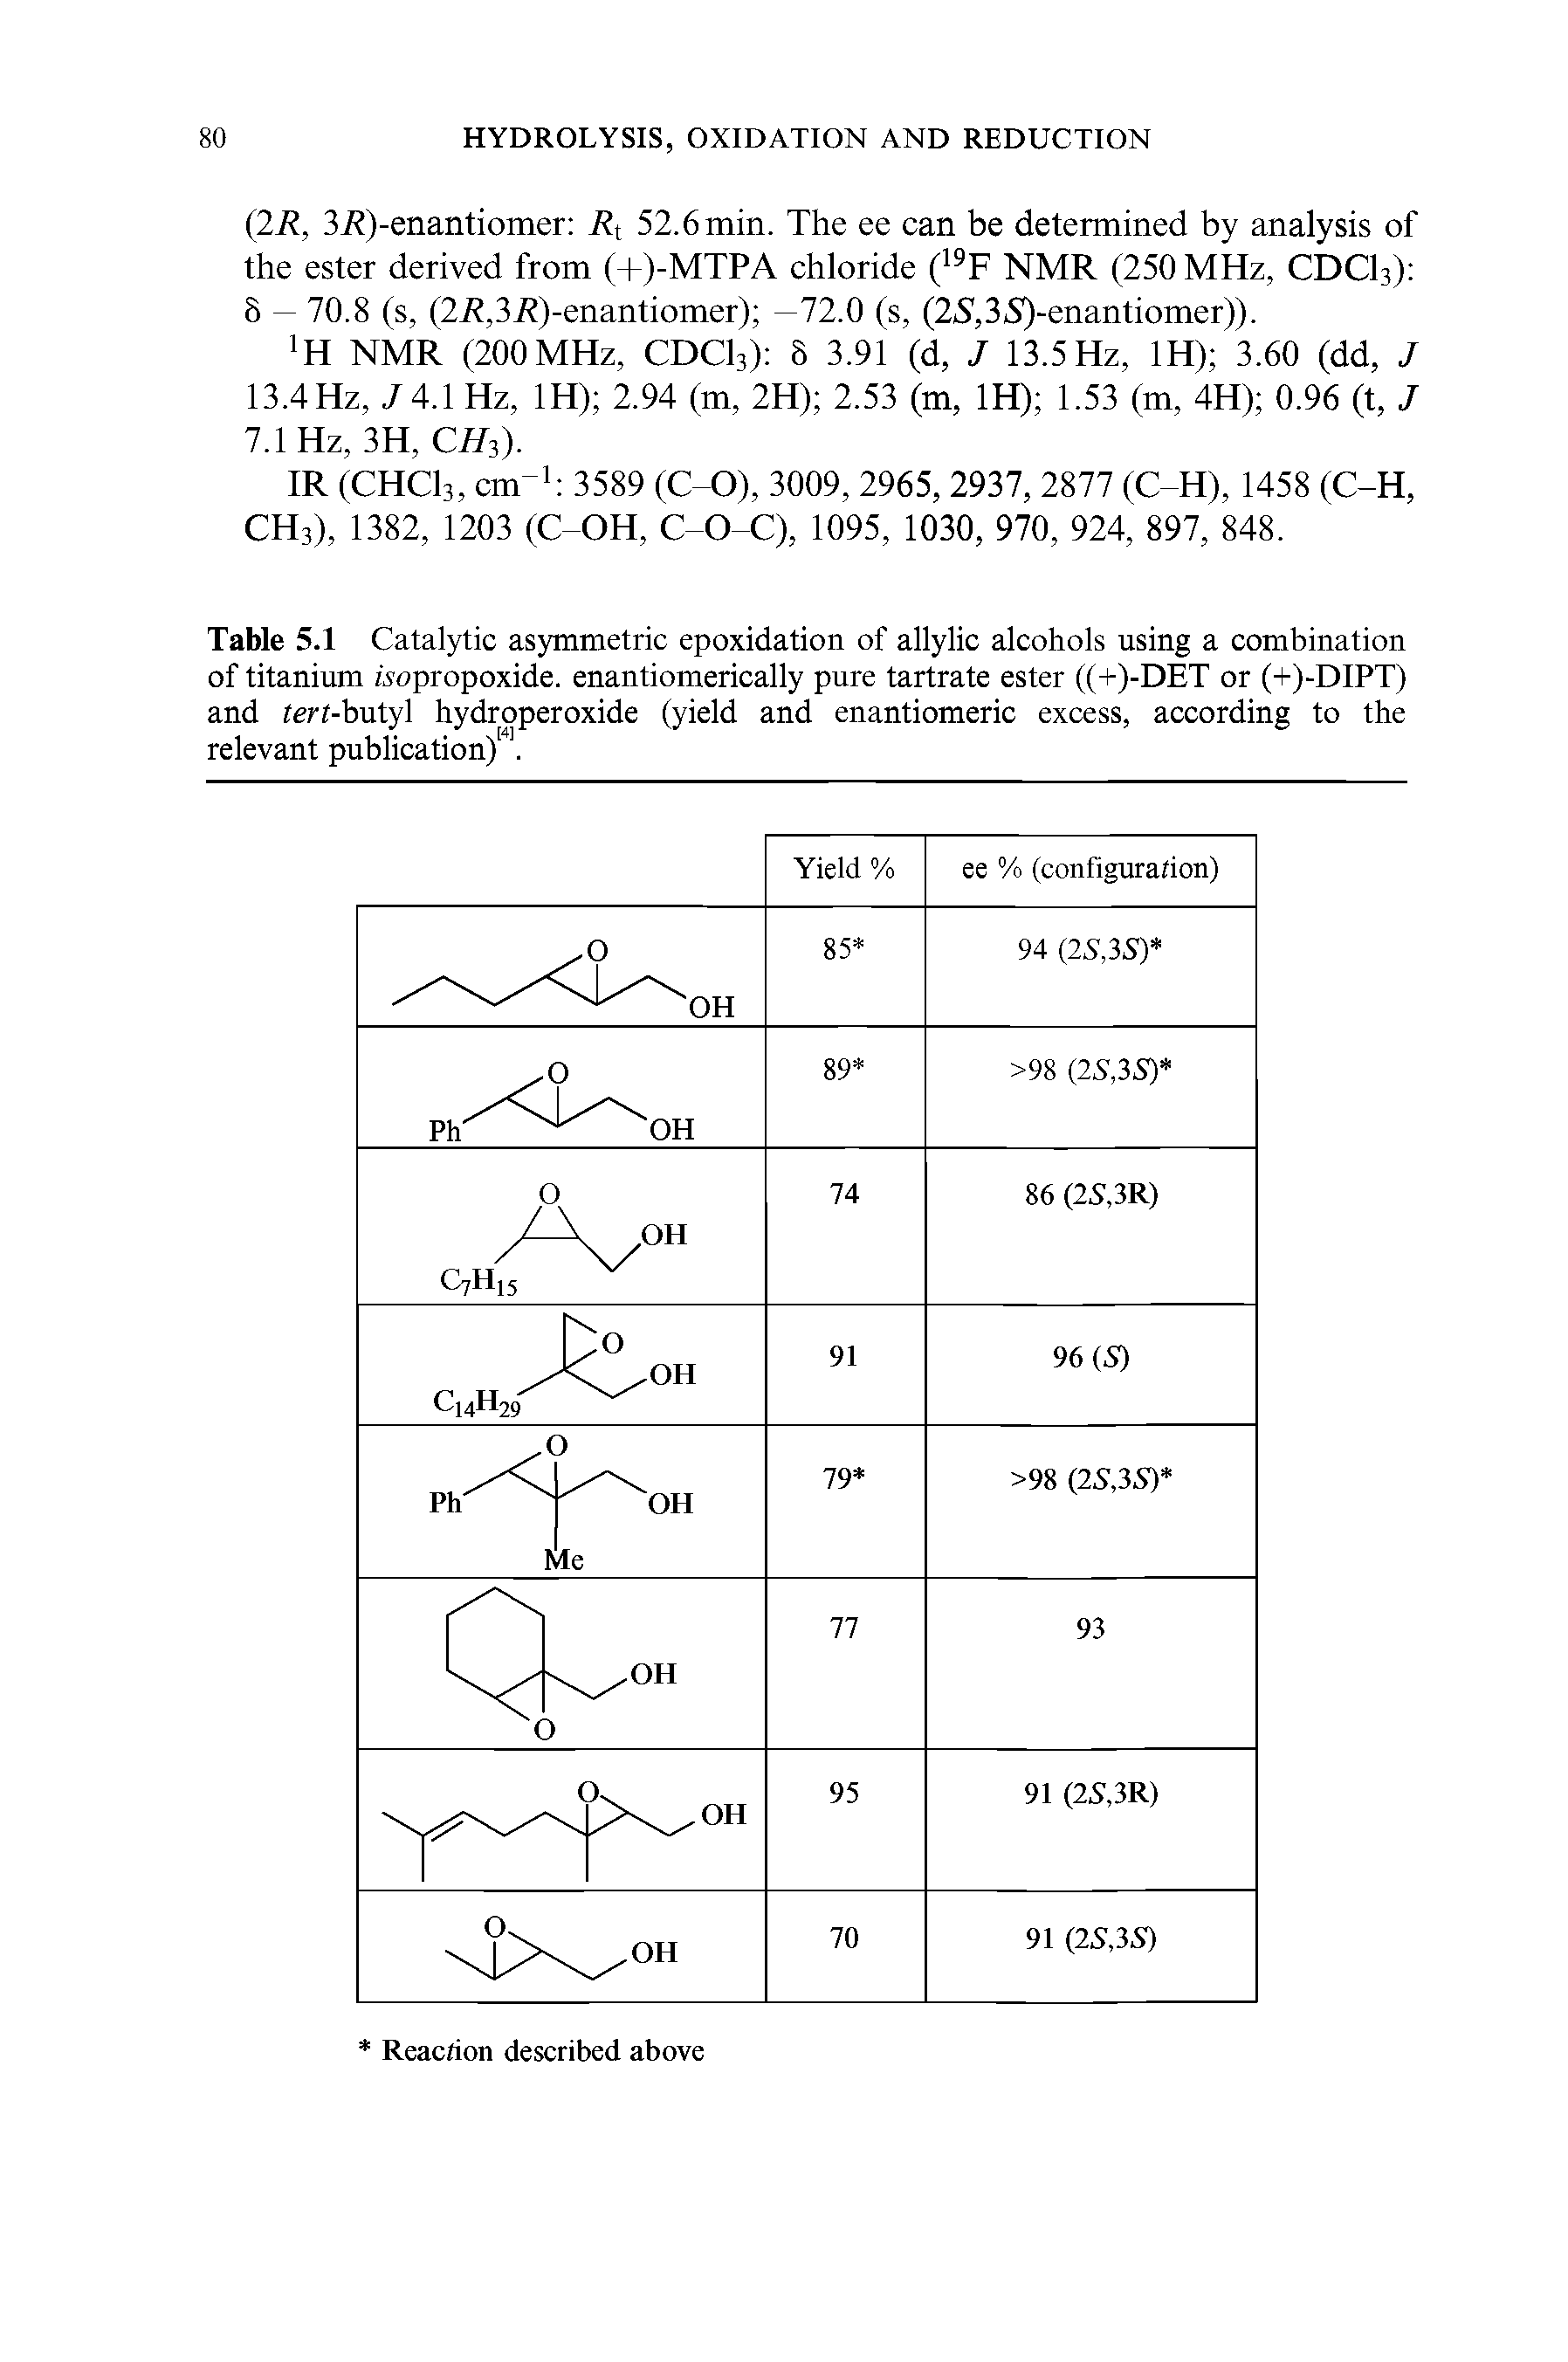 Table 5.1 Catalytic asymmetric epoxidation of allylic alcohols using a combination of titanium wopropoxide. enantiomerically pure tartrate ester ((+)-DET or (+)-DIPT) and rerr-butyl hydroperoxide (yield and enantiomeric excess, according to the relevant publication). ...